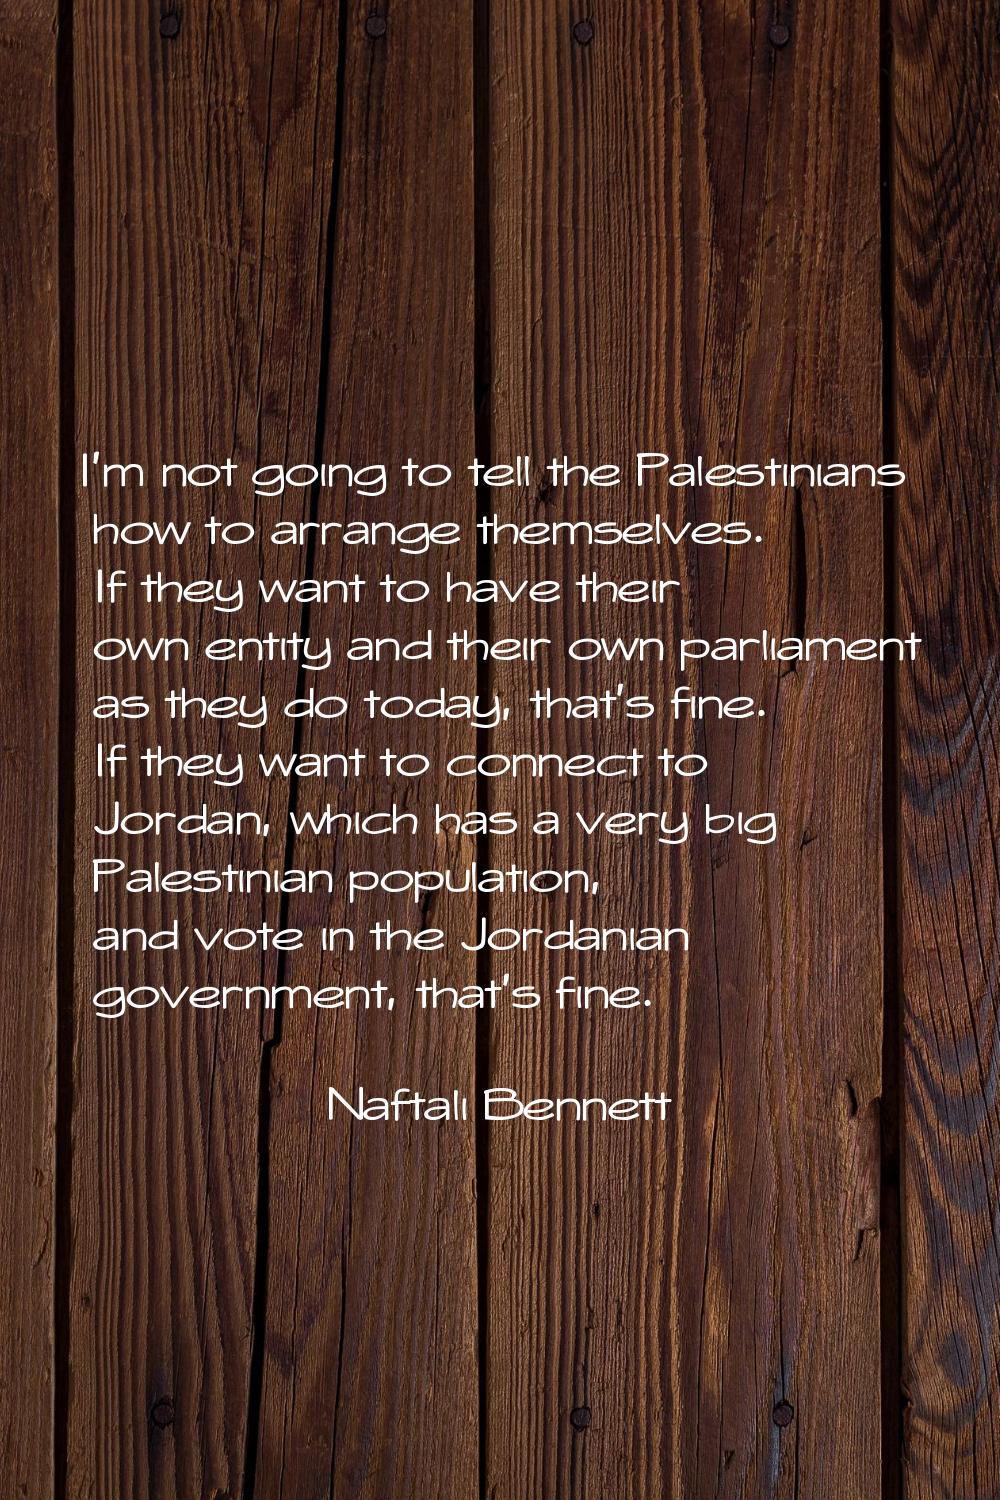 I'm not going to tell the Palestinians how to arrange themselves. If they want to have their own en